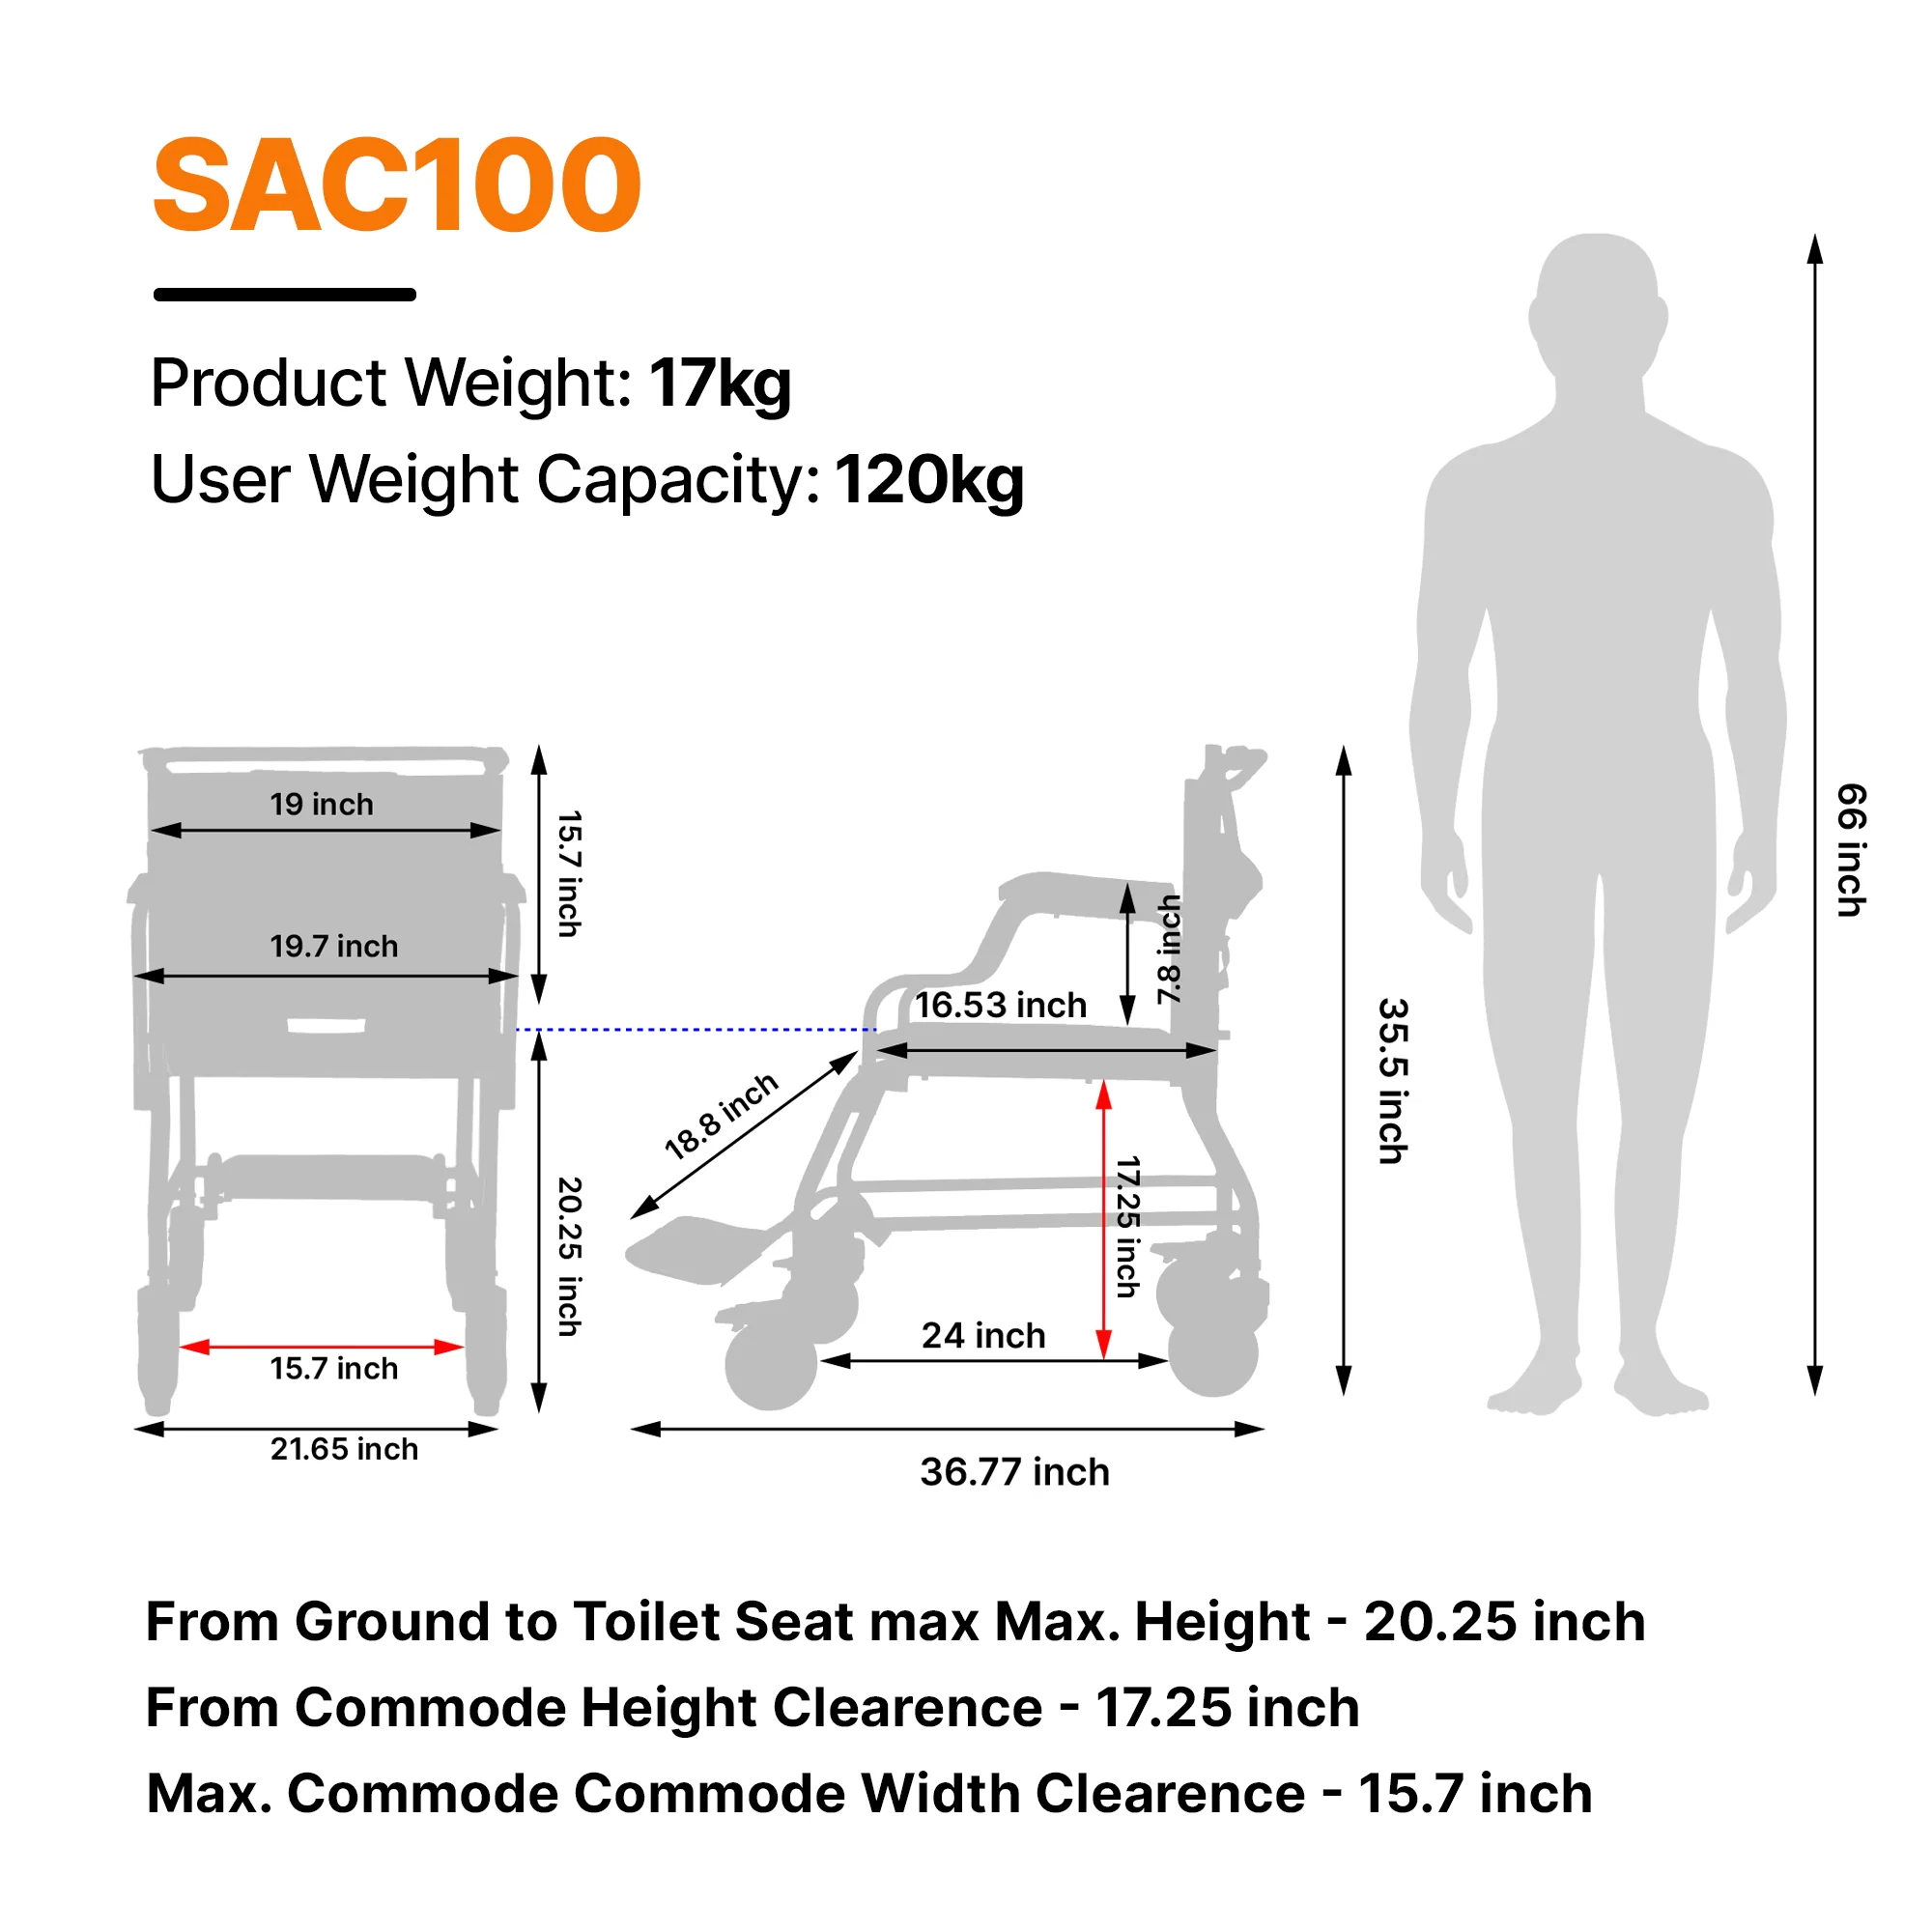 Arcatron Mobility SAC100 Profile Specifications